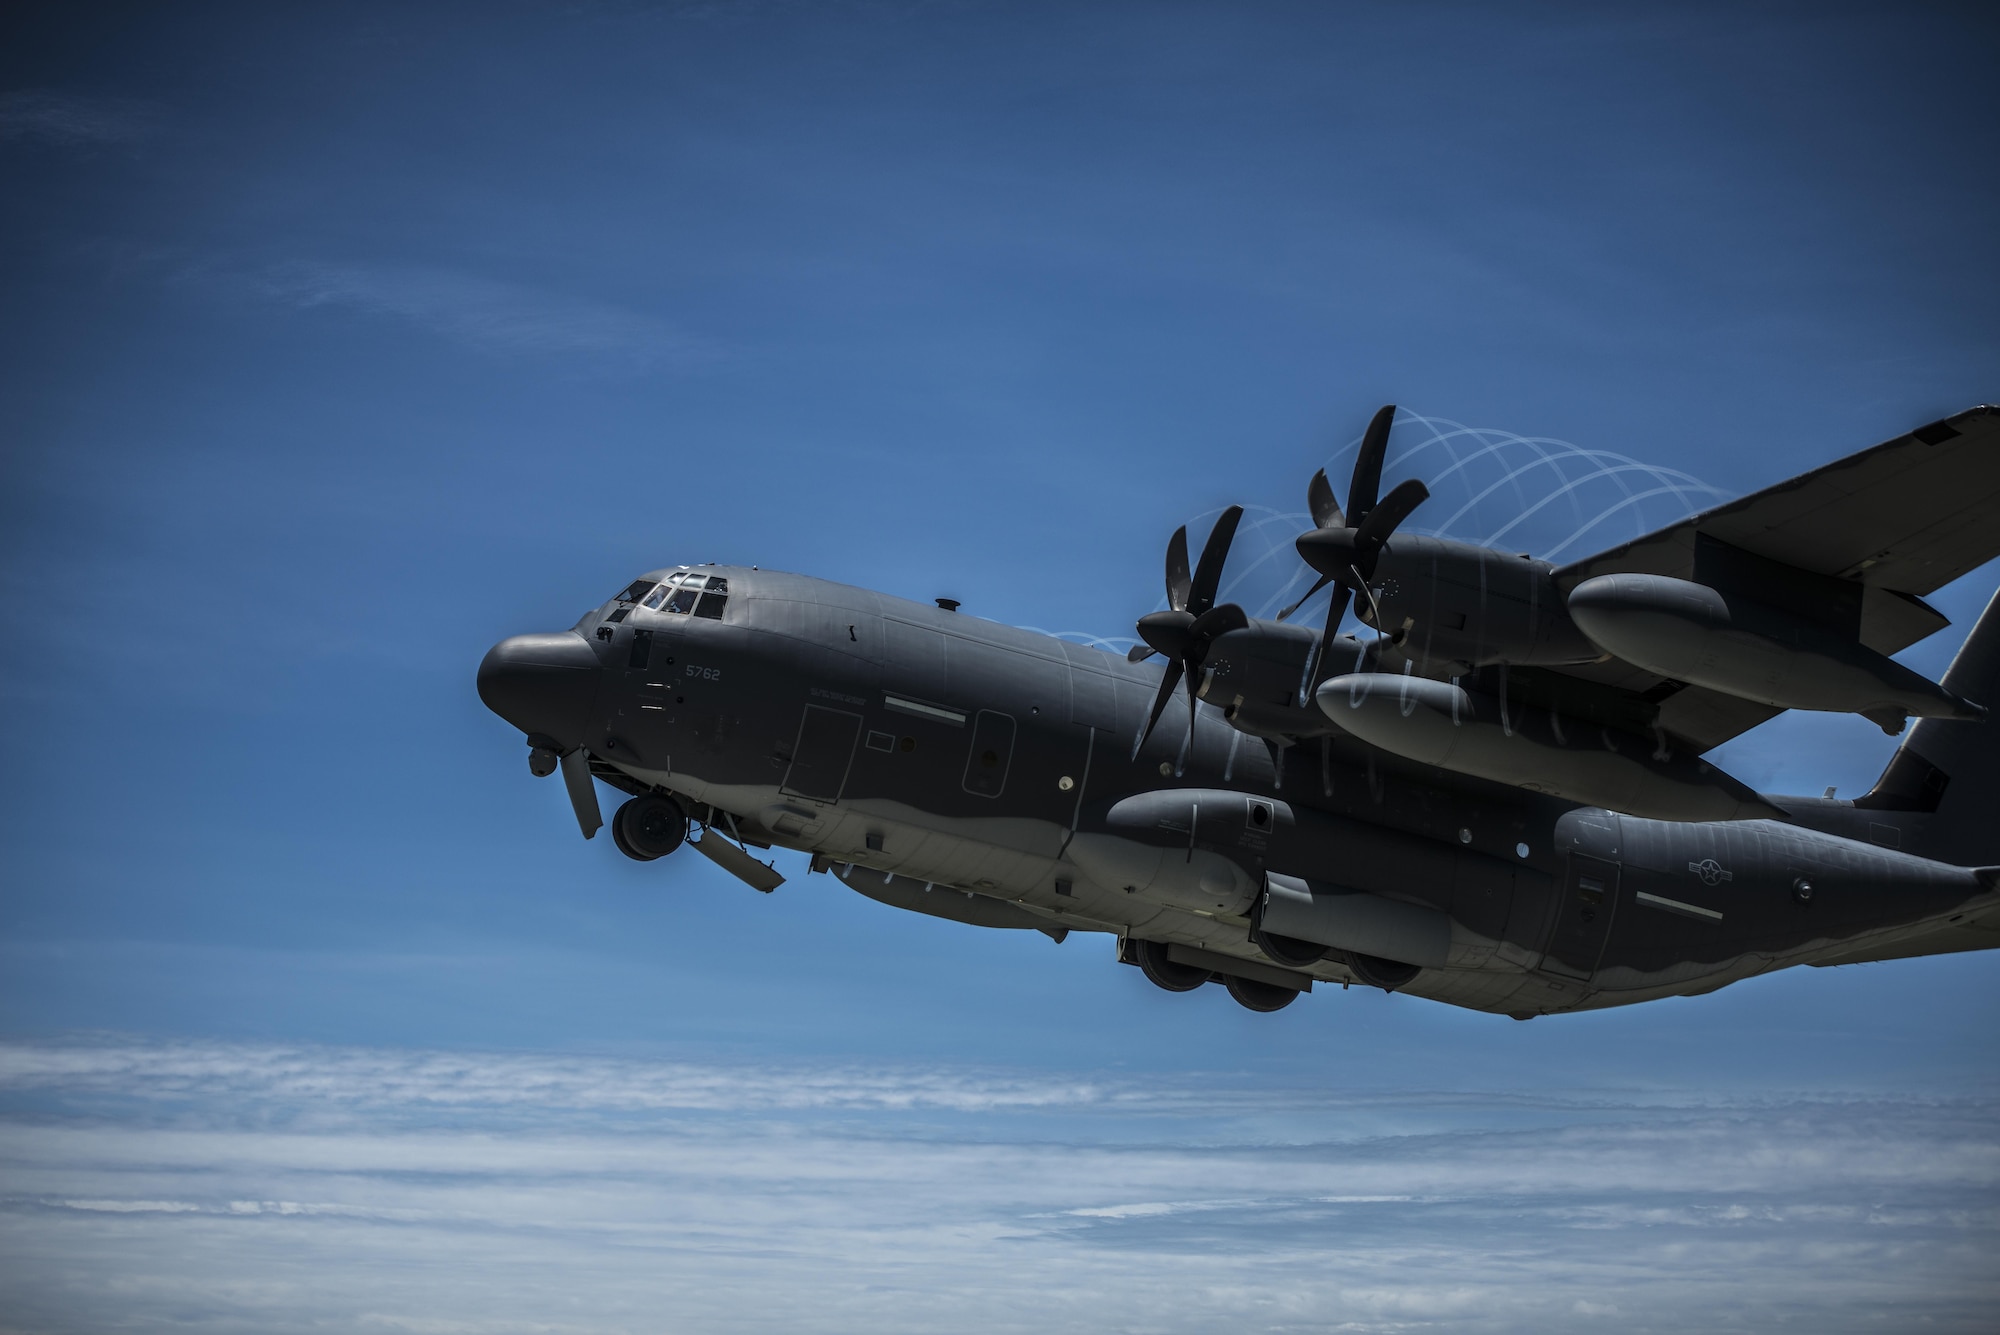 A U.S. Air Force MC-130J Commando II flies during a mass launch training mission June 22, 2017, at Ie Shima Range, Okinawa, Japan. Routine flights and airdrops are conducted to maintain proficiency and training certifications for prospective missions. (U.S. Air Force photo by Capt. Jessica Tait)